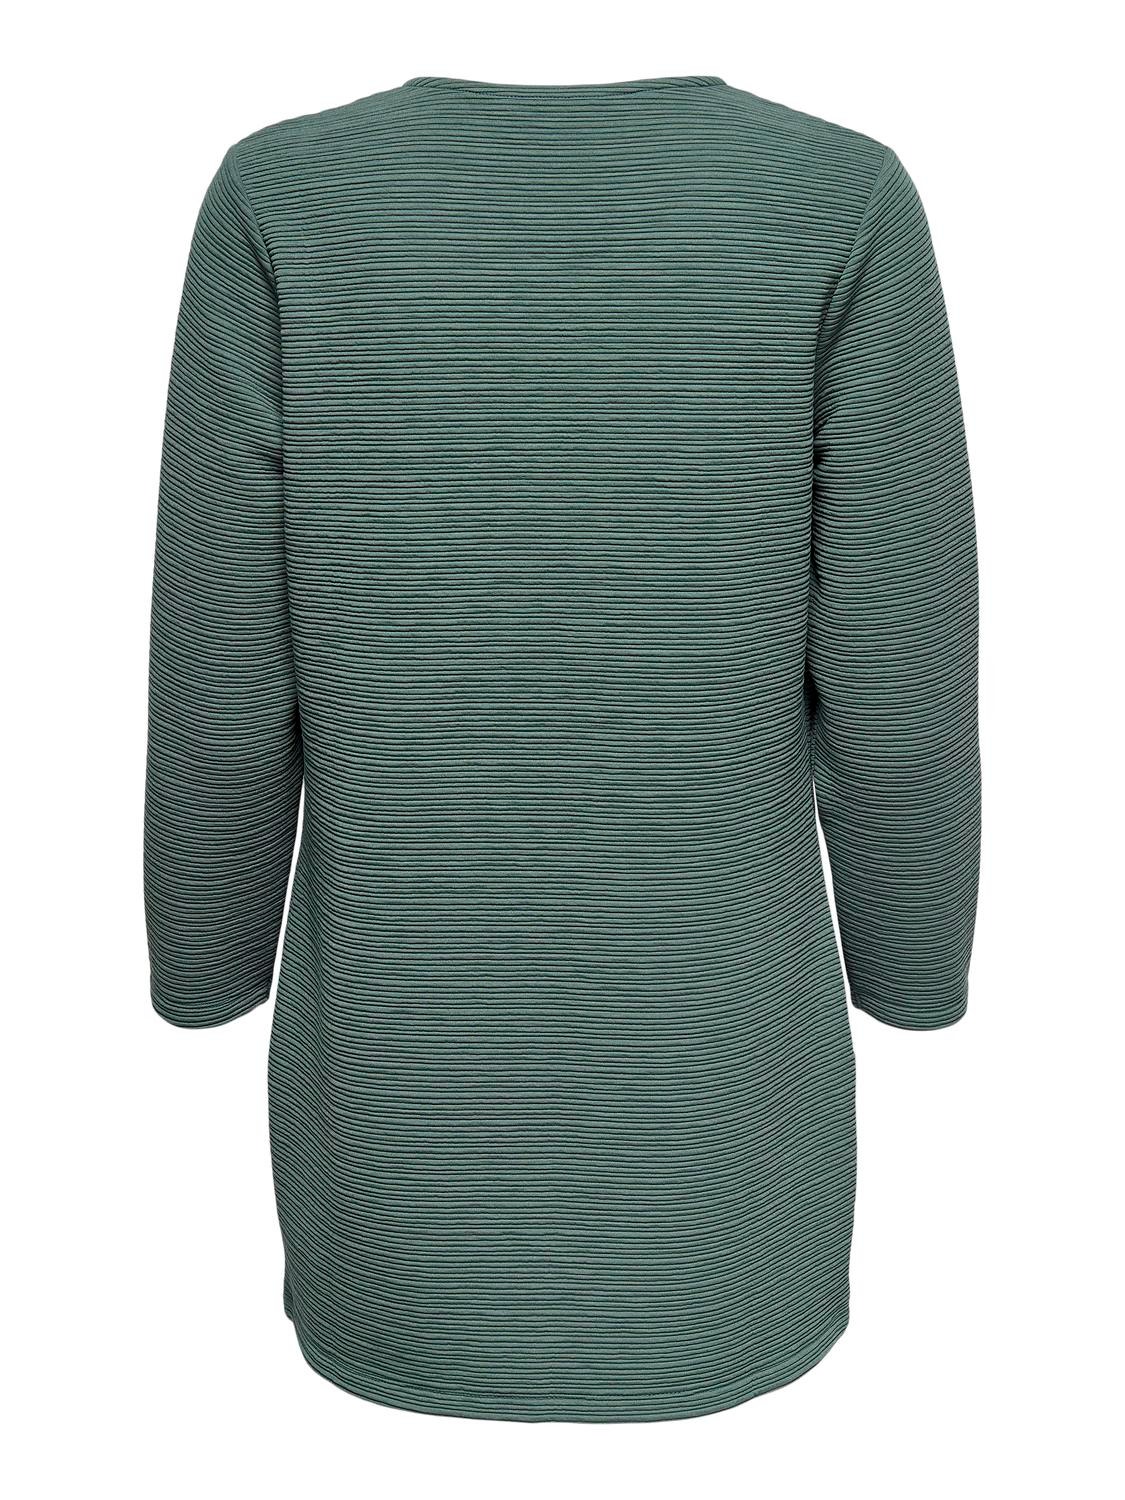 ONLY Long ample Cardigan -Balsam Green - 15112273